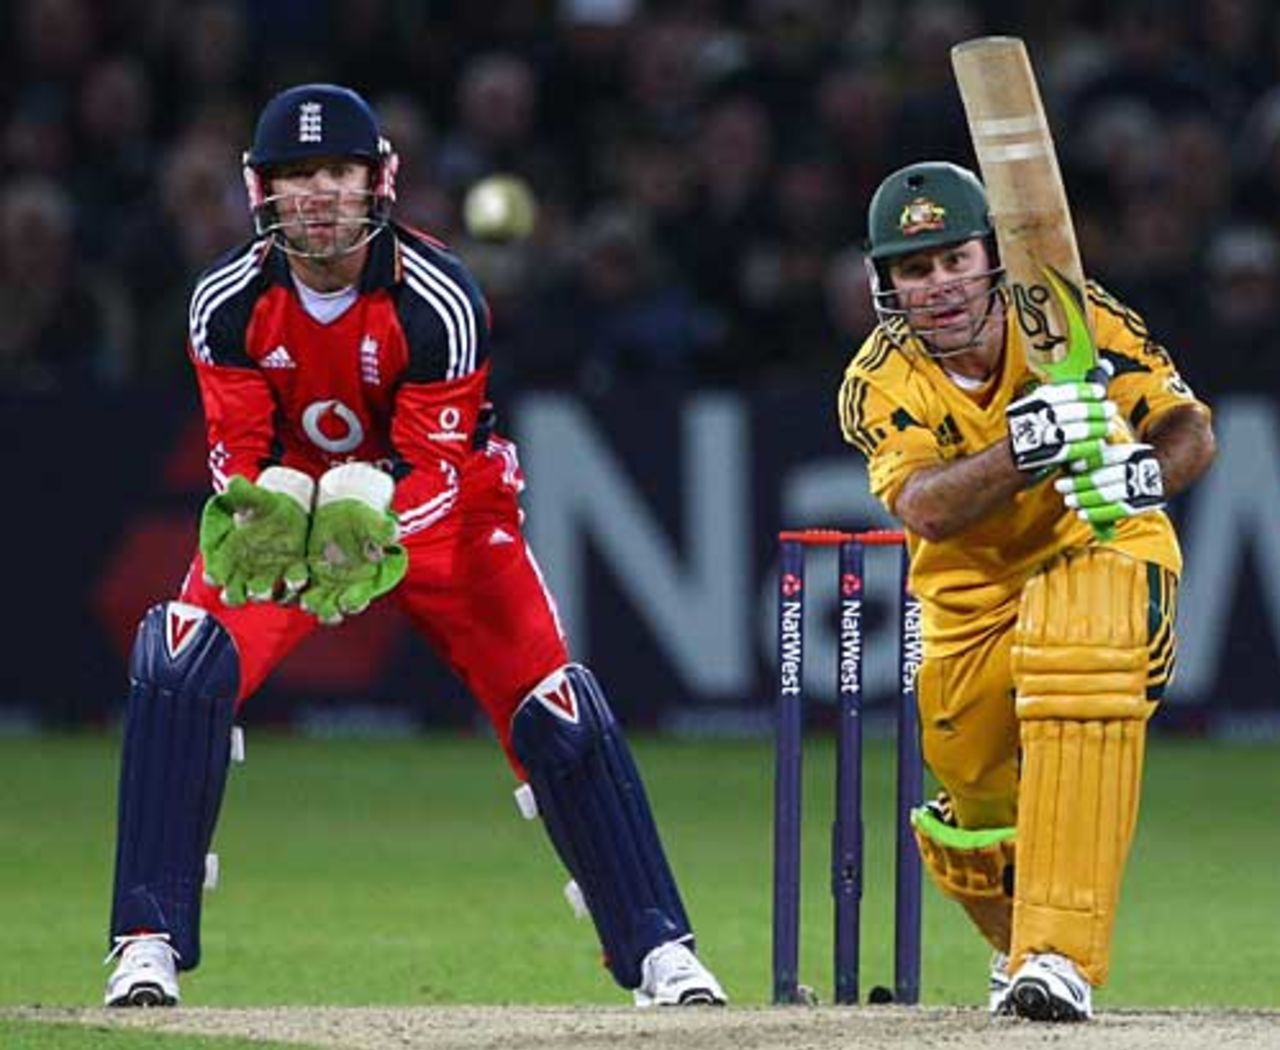 Ricky Ponting has shown no ill-effects after his trip home, England v Australia, 5th ODI, Trent Bridge, September 15, 2009